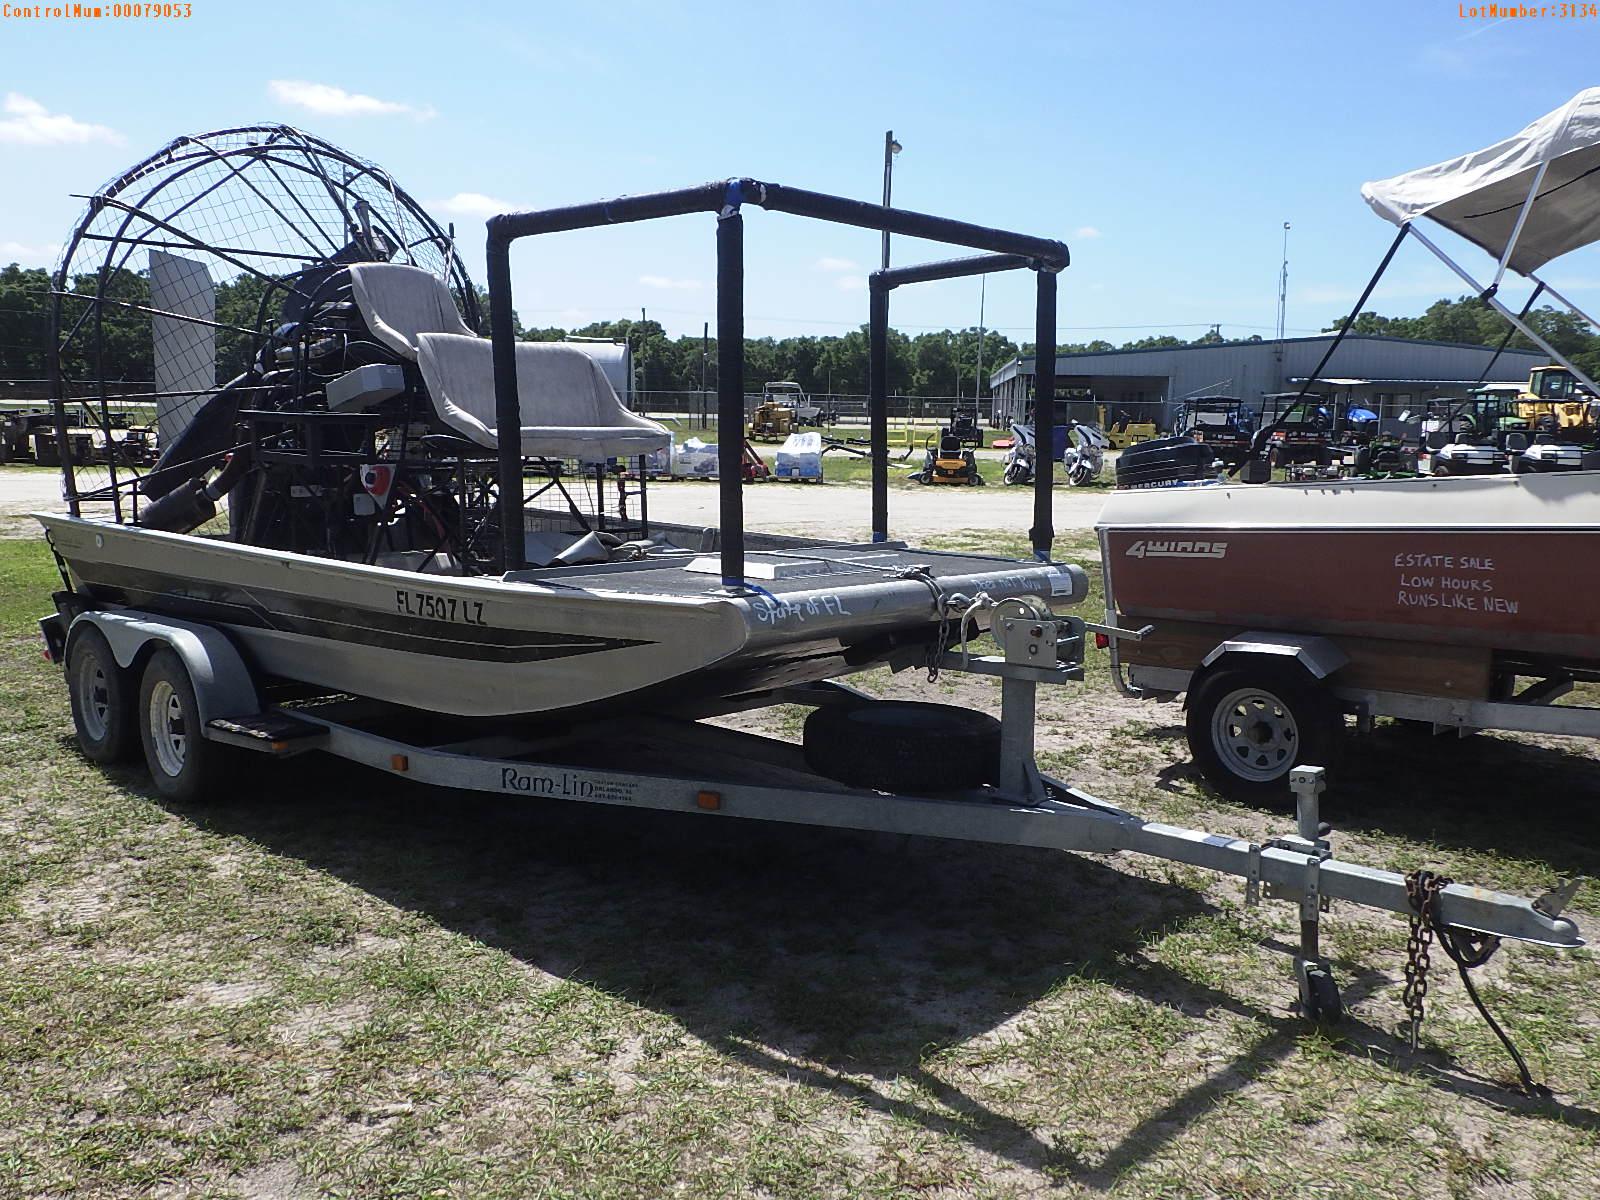 4-03134 (Vessels-Air boat)  Seller: Florida State F.W.C. 2002 DKP AIRBOAT